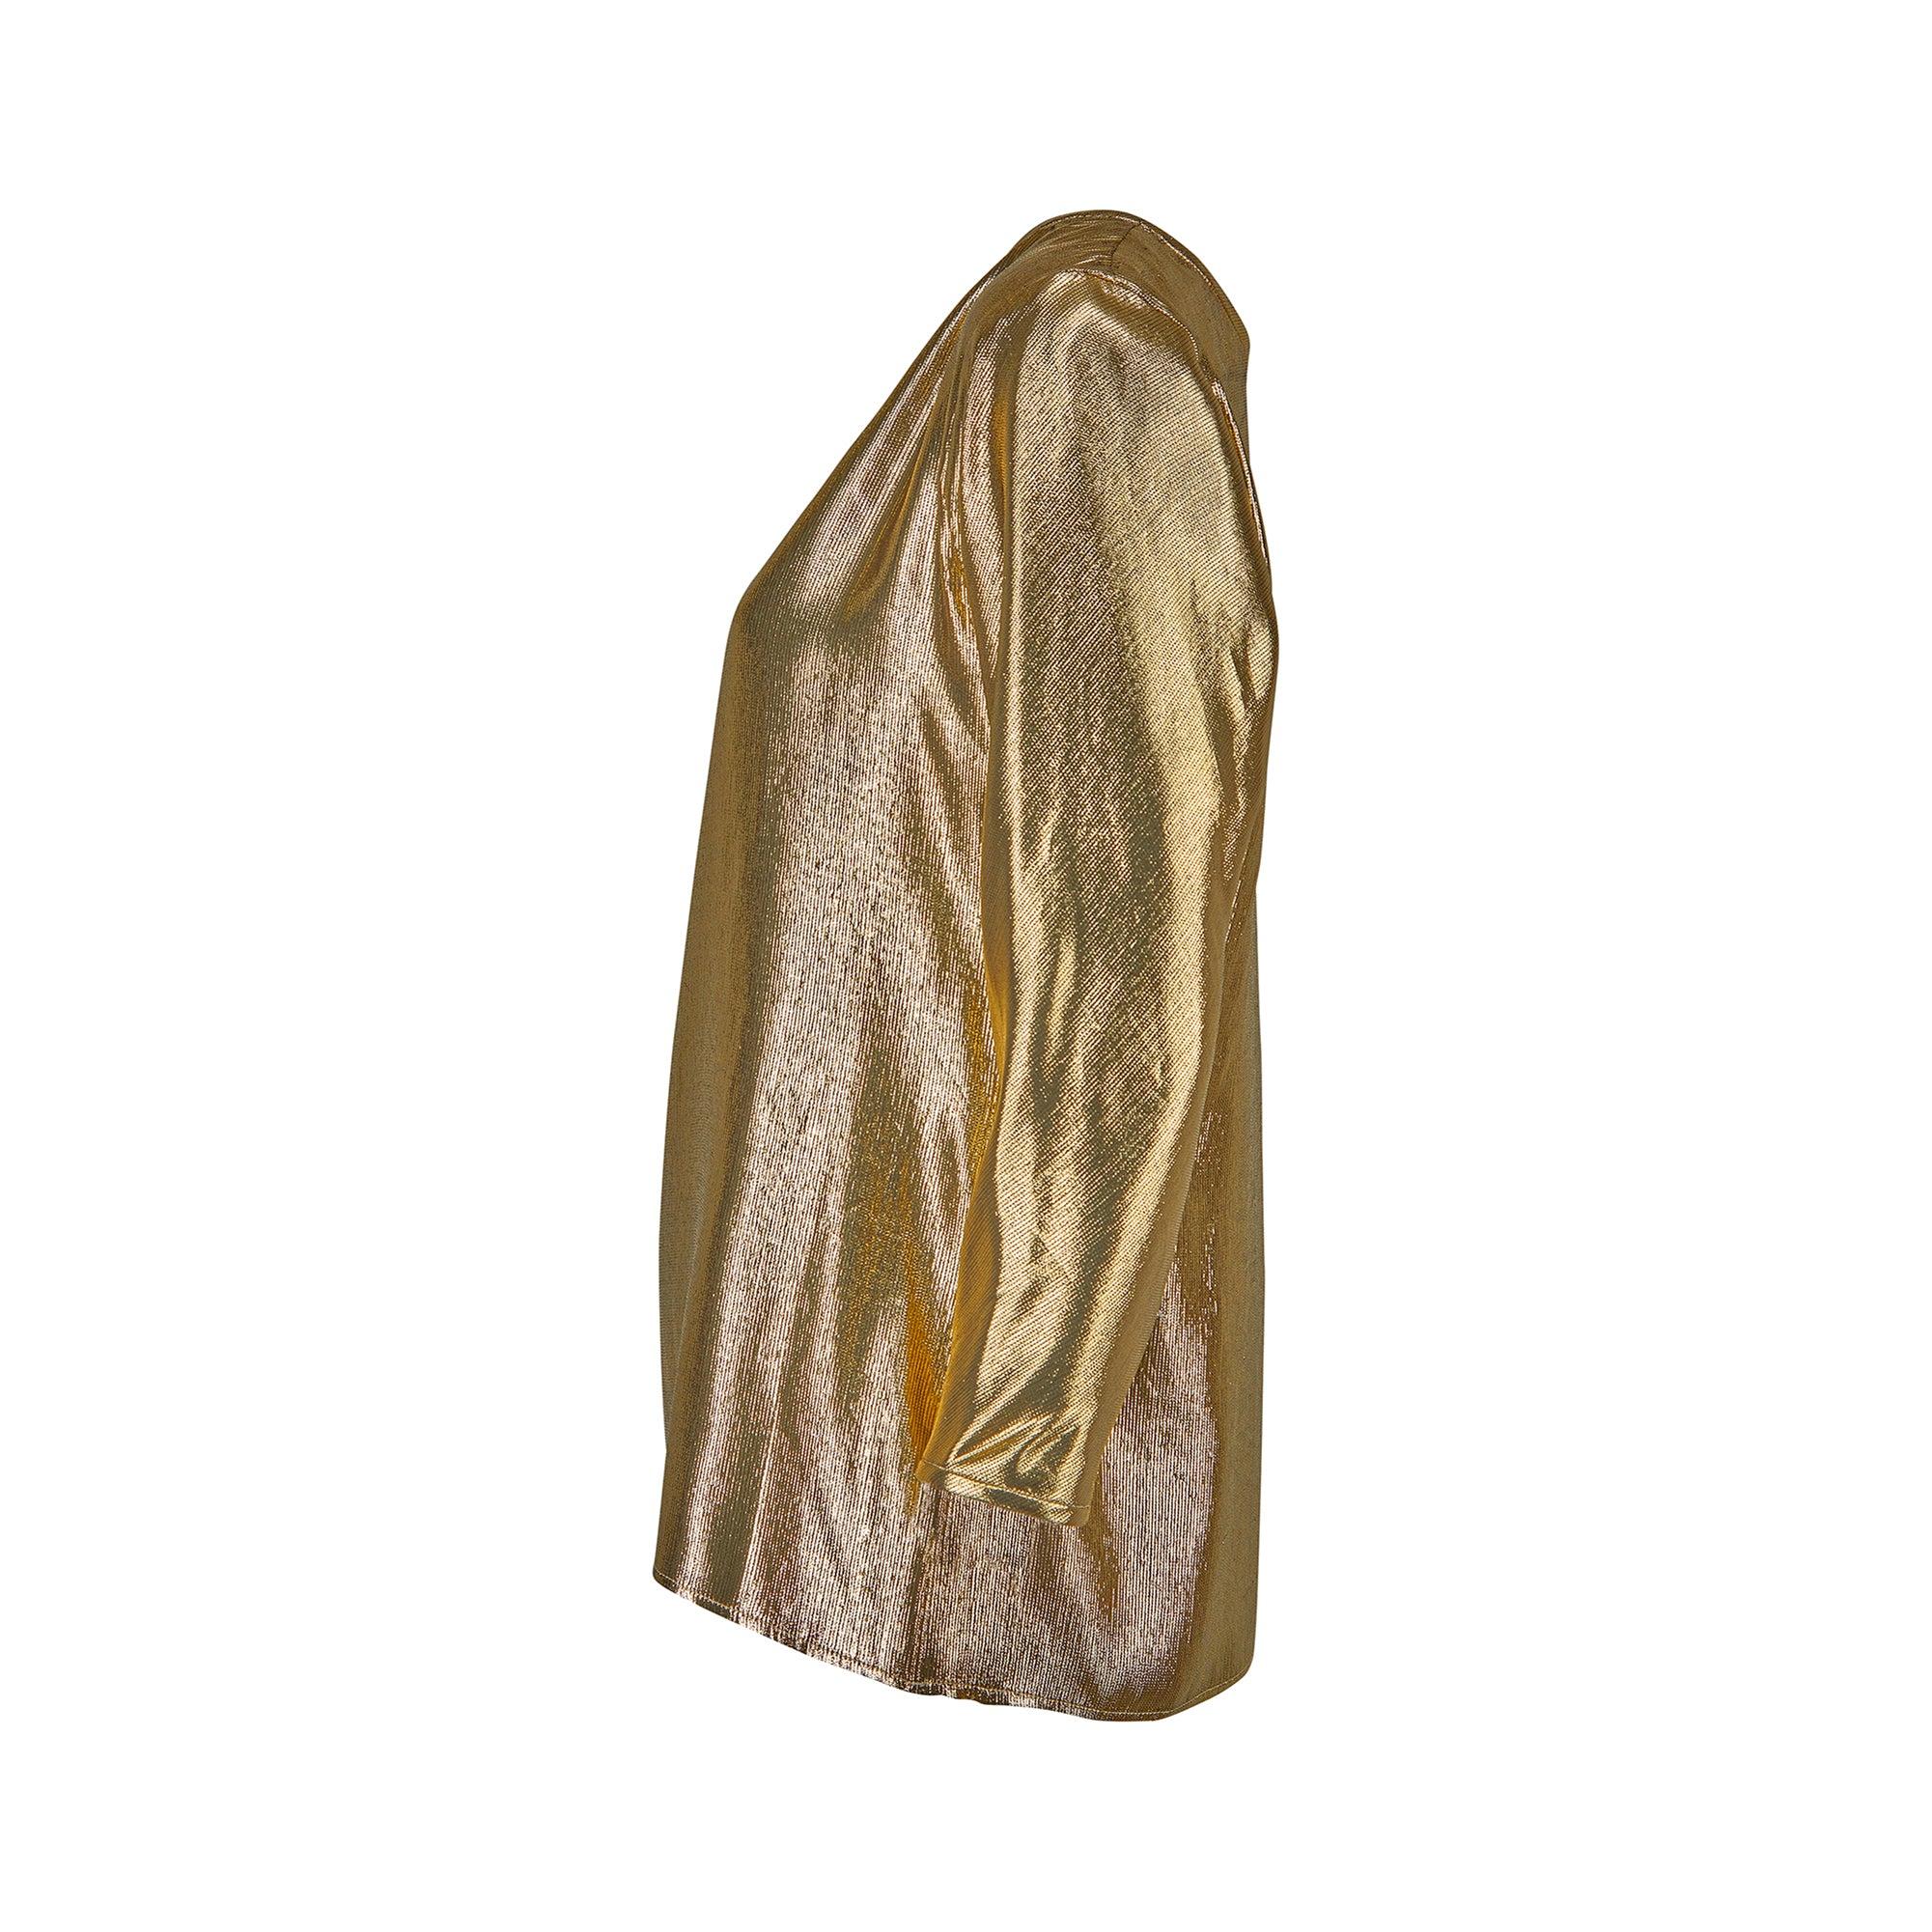 Epitomising the glamour associated with Saint Laurent to this day, this shimmering gold lame top is a classic addition to any party wardrobe. This documented runway piece is from the Fall 1991 show, designed by Yves himself, where model after model